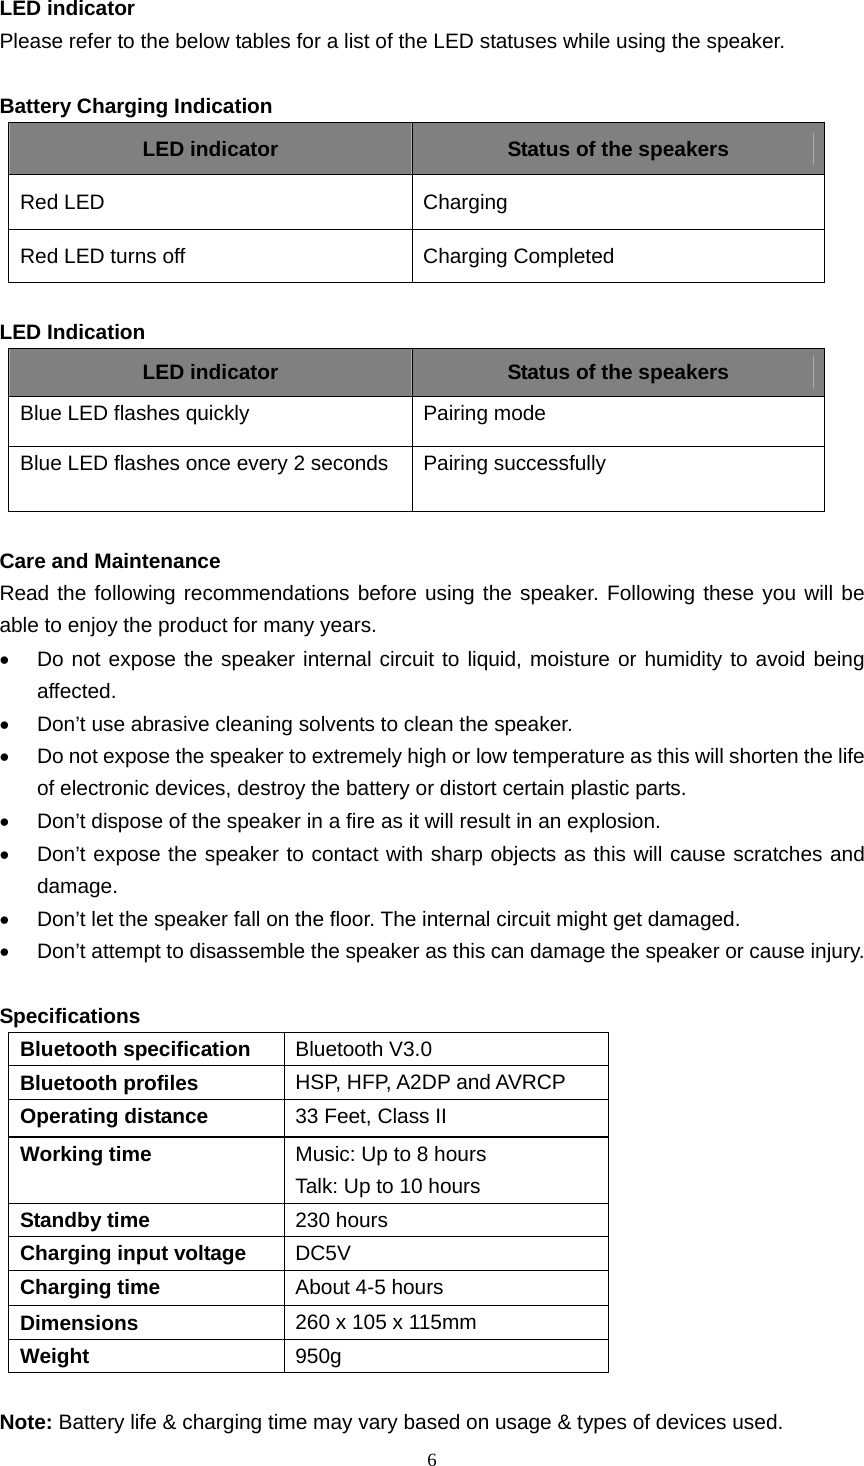  6  LED indicator Please refer to the below tables for a list of the LED statuses while using the speaker.  Battery Charging Indication LED indicator  Status of the speakers Red LED   Charging  Red LED turns off  Charging Completed  LED Indication LED indicator  Status of the speakers Blue LED flashes quickly  Pairing mode Blue LED flashes once every 2 seconds  Pairing successfully  Care and Maintenance Read the following recommendations before using the speaker. Following these you will be able to enjoy the product for many years. •  Do not expose the speaker internal circuit to liquid, moisture or humidity to avoid being affected. •  Don’t use abrasive cleaning solvents to clean the speaker. •  Do not expose the speaker to extremely high or low temperature as this will shorten the life of electronic devices, destroy the battery or distort certain plastic parts. •  Don’t dispose of the speaker in a fire as it will result in an explosion. •  Don’t expose the speaker to contact with sharp objects as this will cause scratches and damage. •  Don’t let the speaker fall on the floor. The internal circuit might get damaged. •  Don’t attempt to disassemble the speaker as this can damage the speaker or cause injury.  Specifications Bluetooth specification  Bluetooth V3.0 Bluetooth profiles  HSP, HFP, A2DP and AVRCP Operating distance  33 Feet, Class II Working time  Music: Up to 8 hours Talk: Up to 10 hours Standby time  230 hours Charging input voltage  DC5V Charging time  About 4-5 hours Dimensions  260 x 105 x 115mm Weight  950g  Note: Battery life &amp; charging time may vary based on usage &amp; types of devices used. 